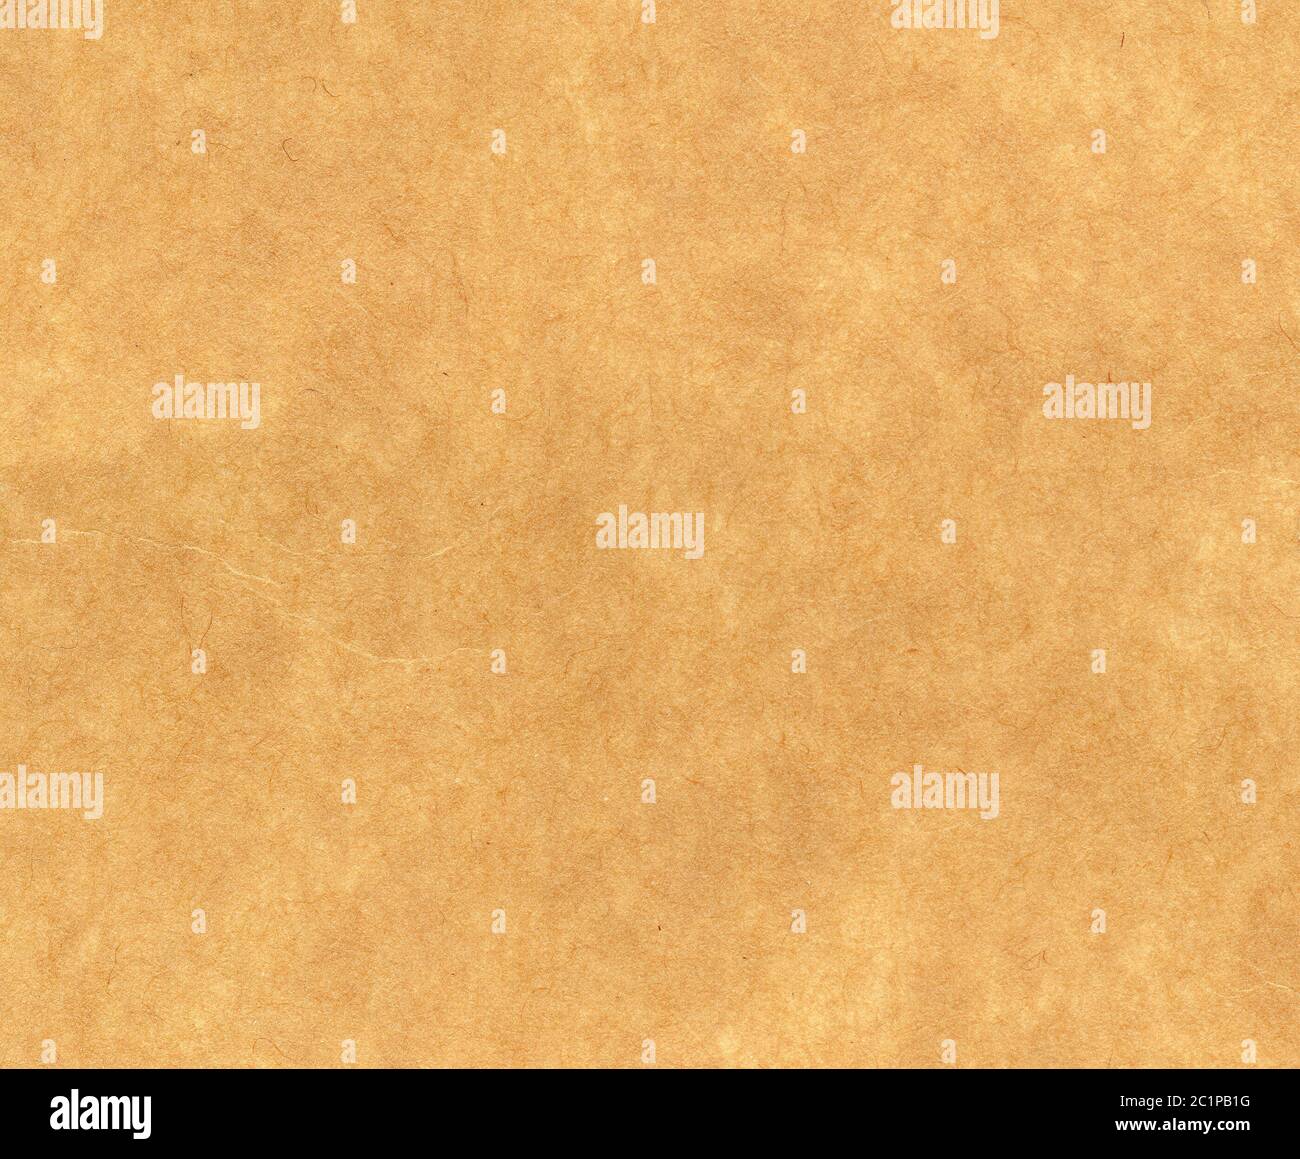 Brown cardboard texture background Stock Photo